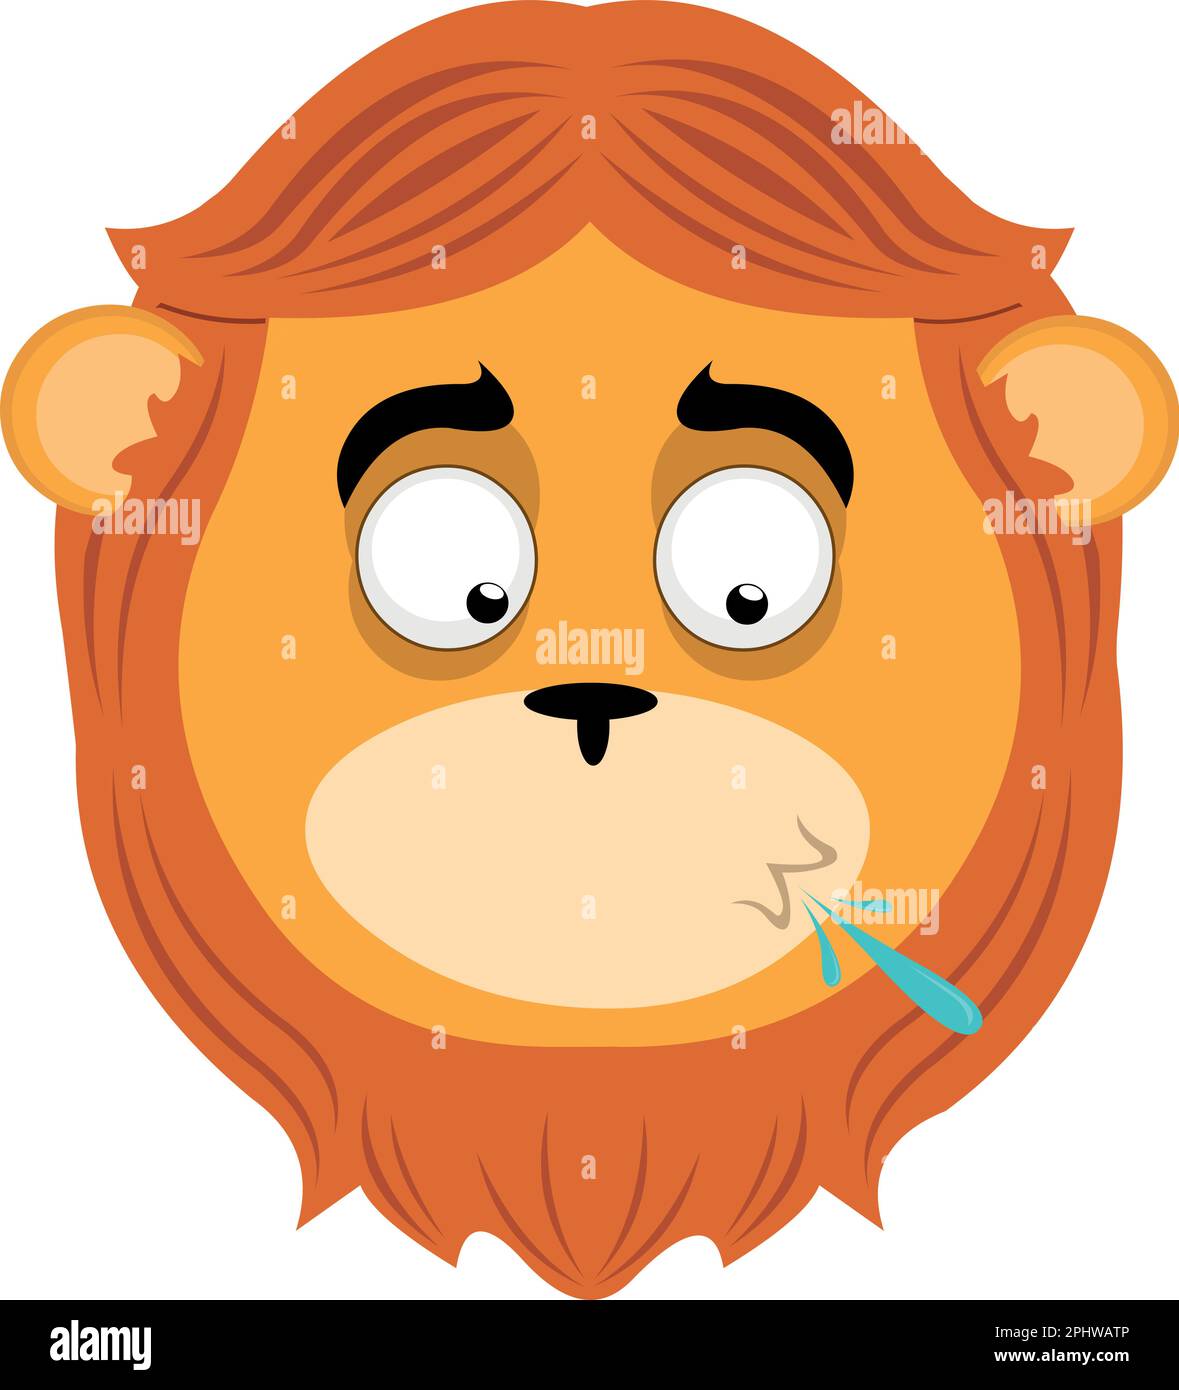 Vector Illustration Face Of A Cartoon Lion Spitting Stock Vector Image